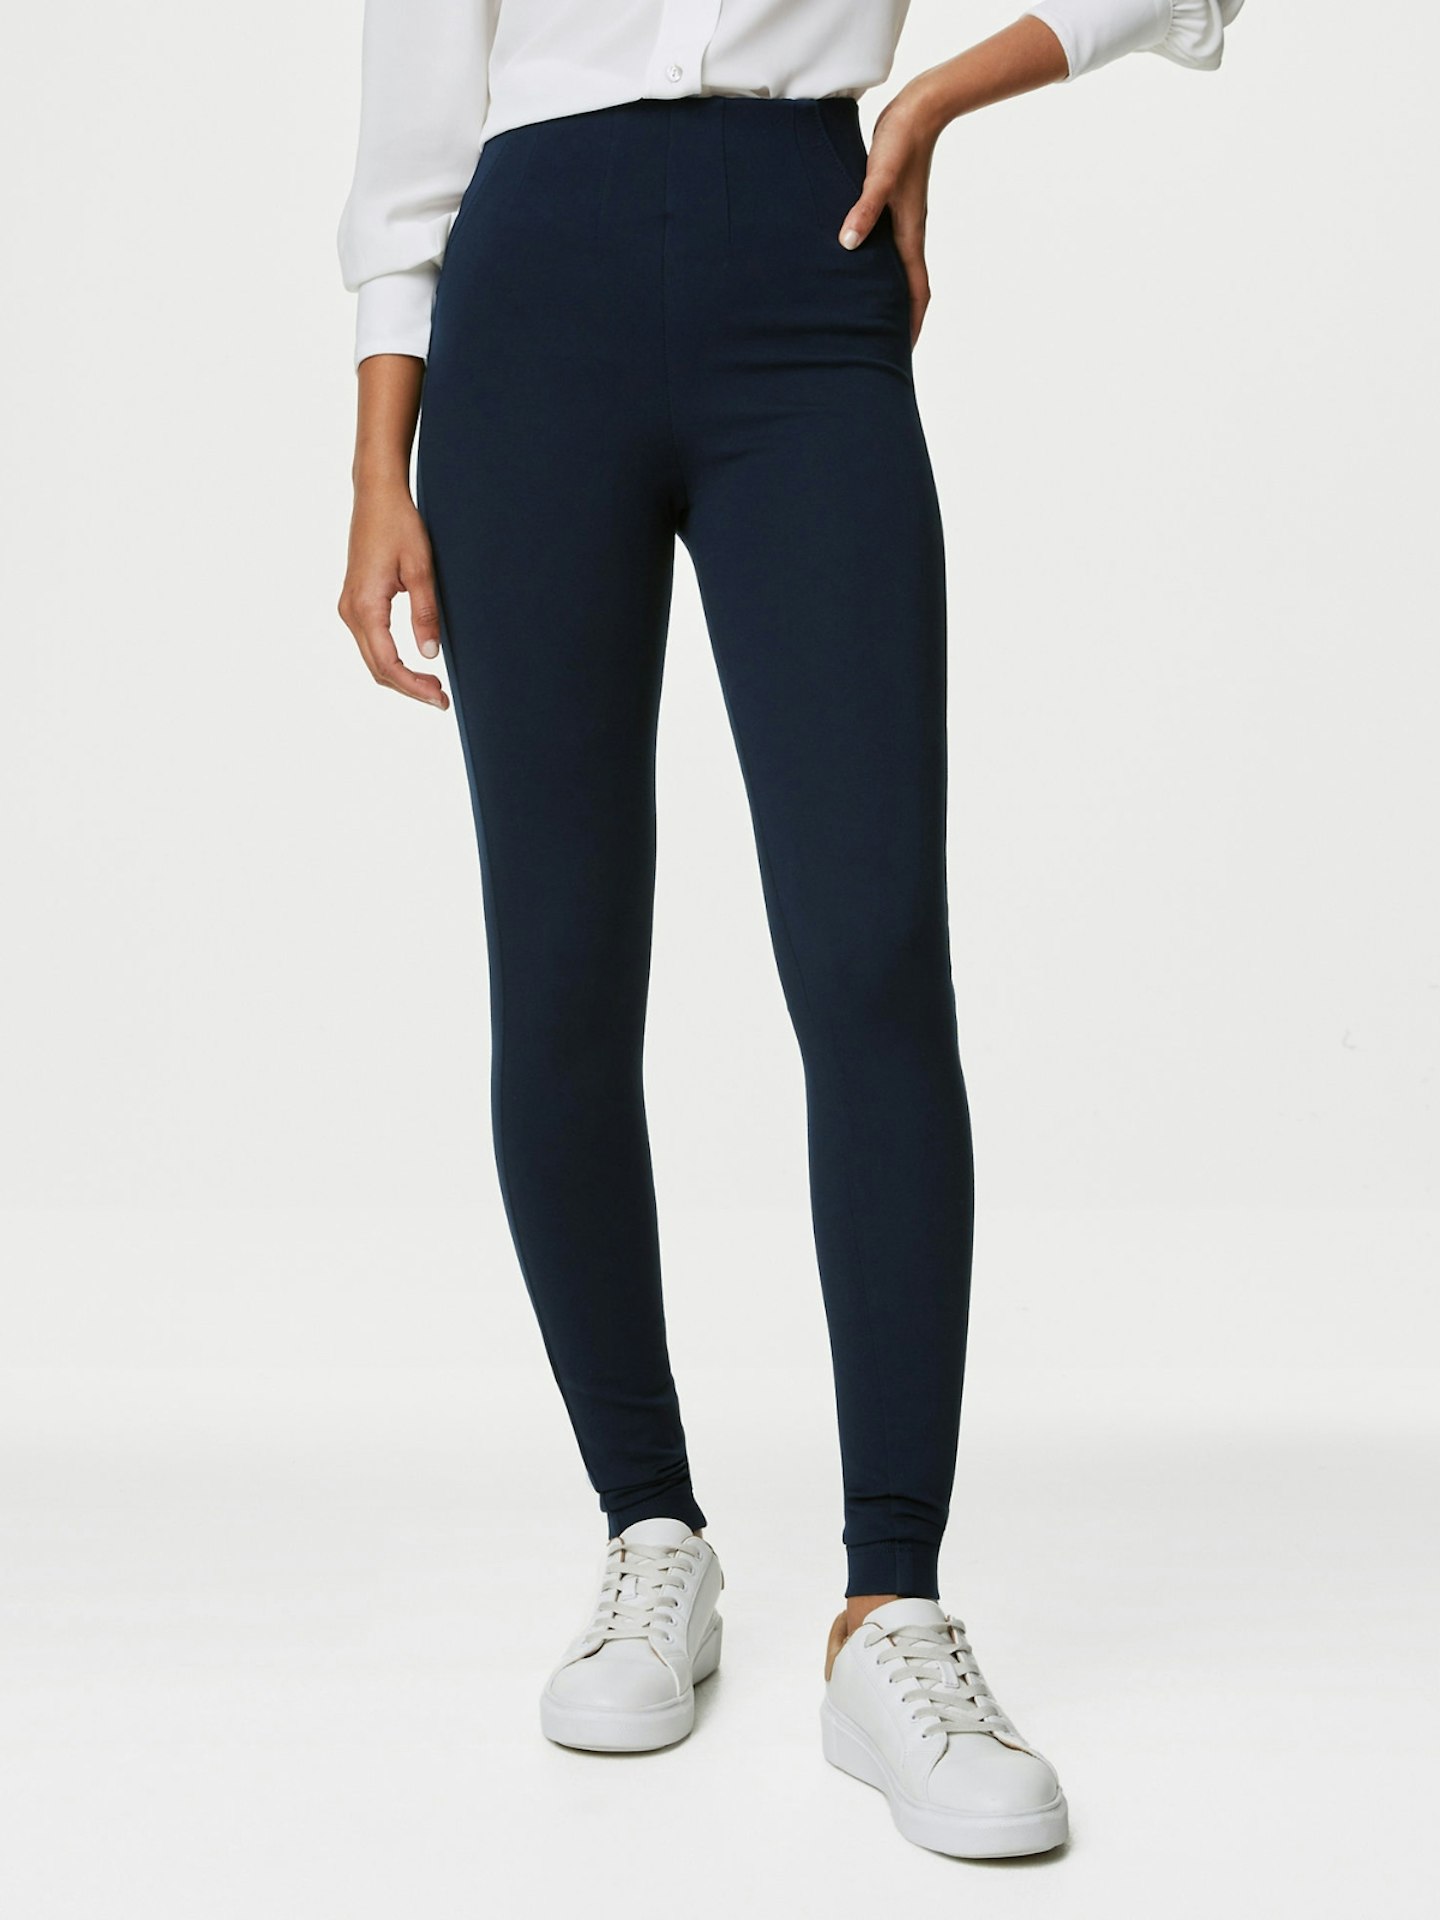 M&S COLLECTION Magic Shaping High Waisted Leggings